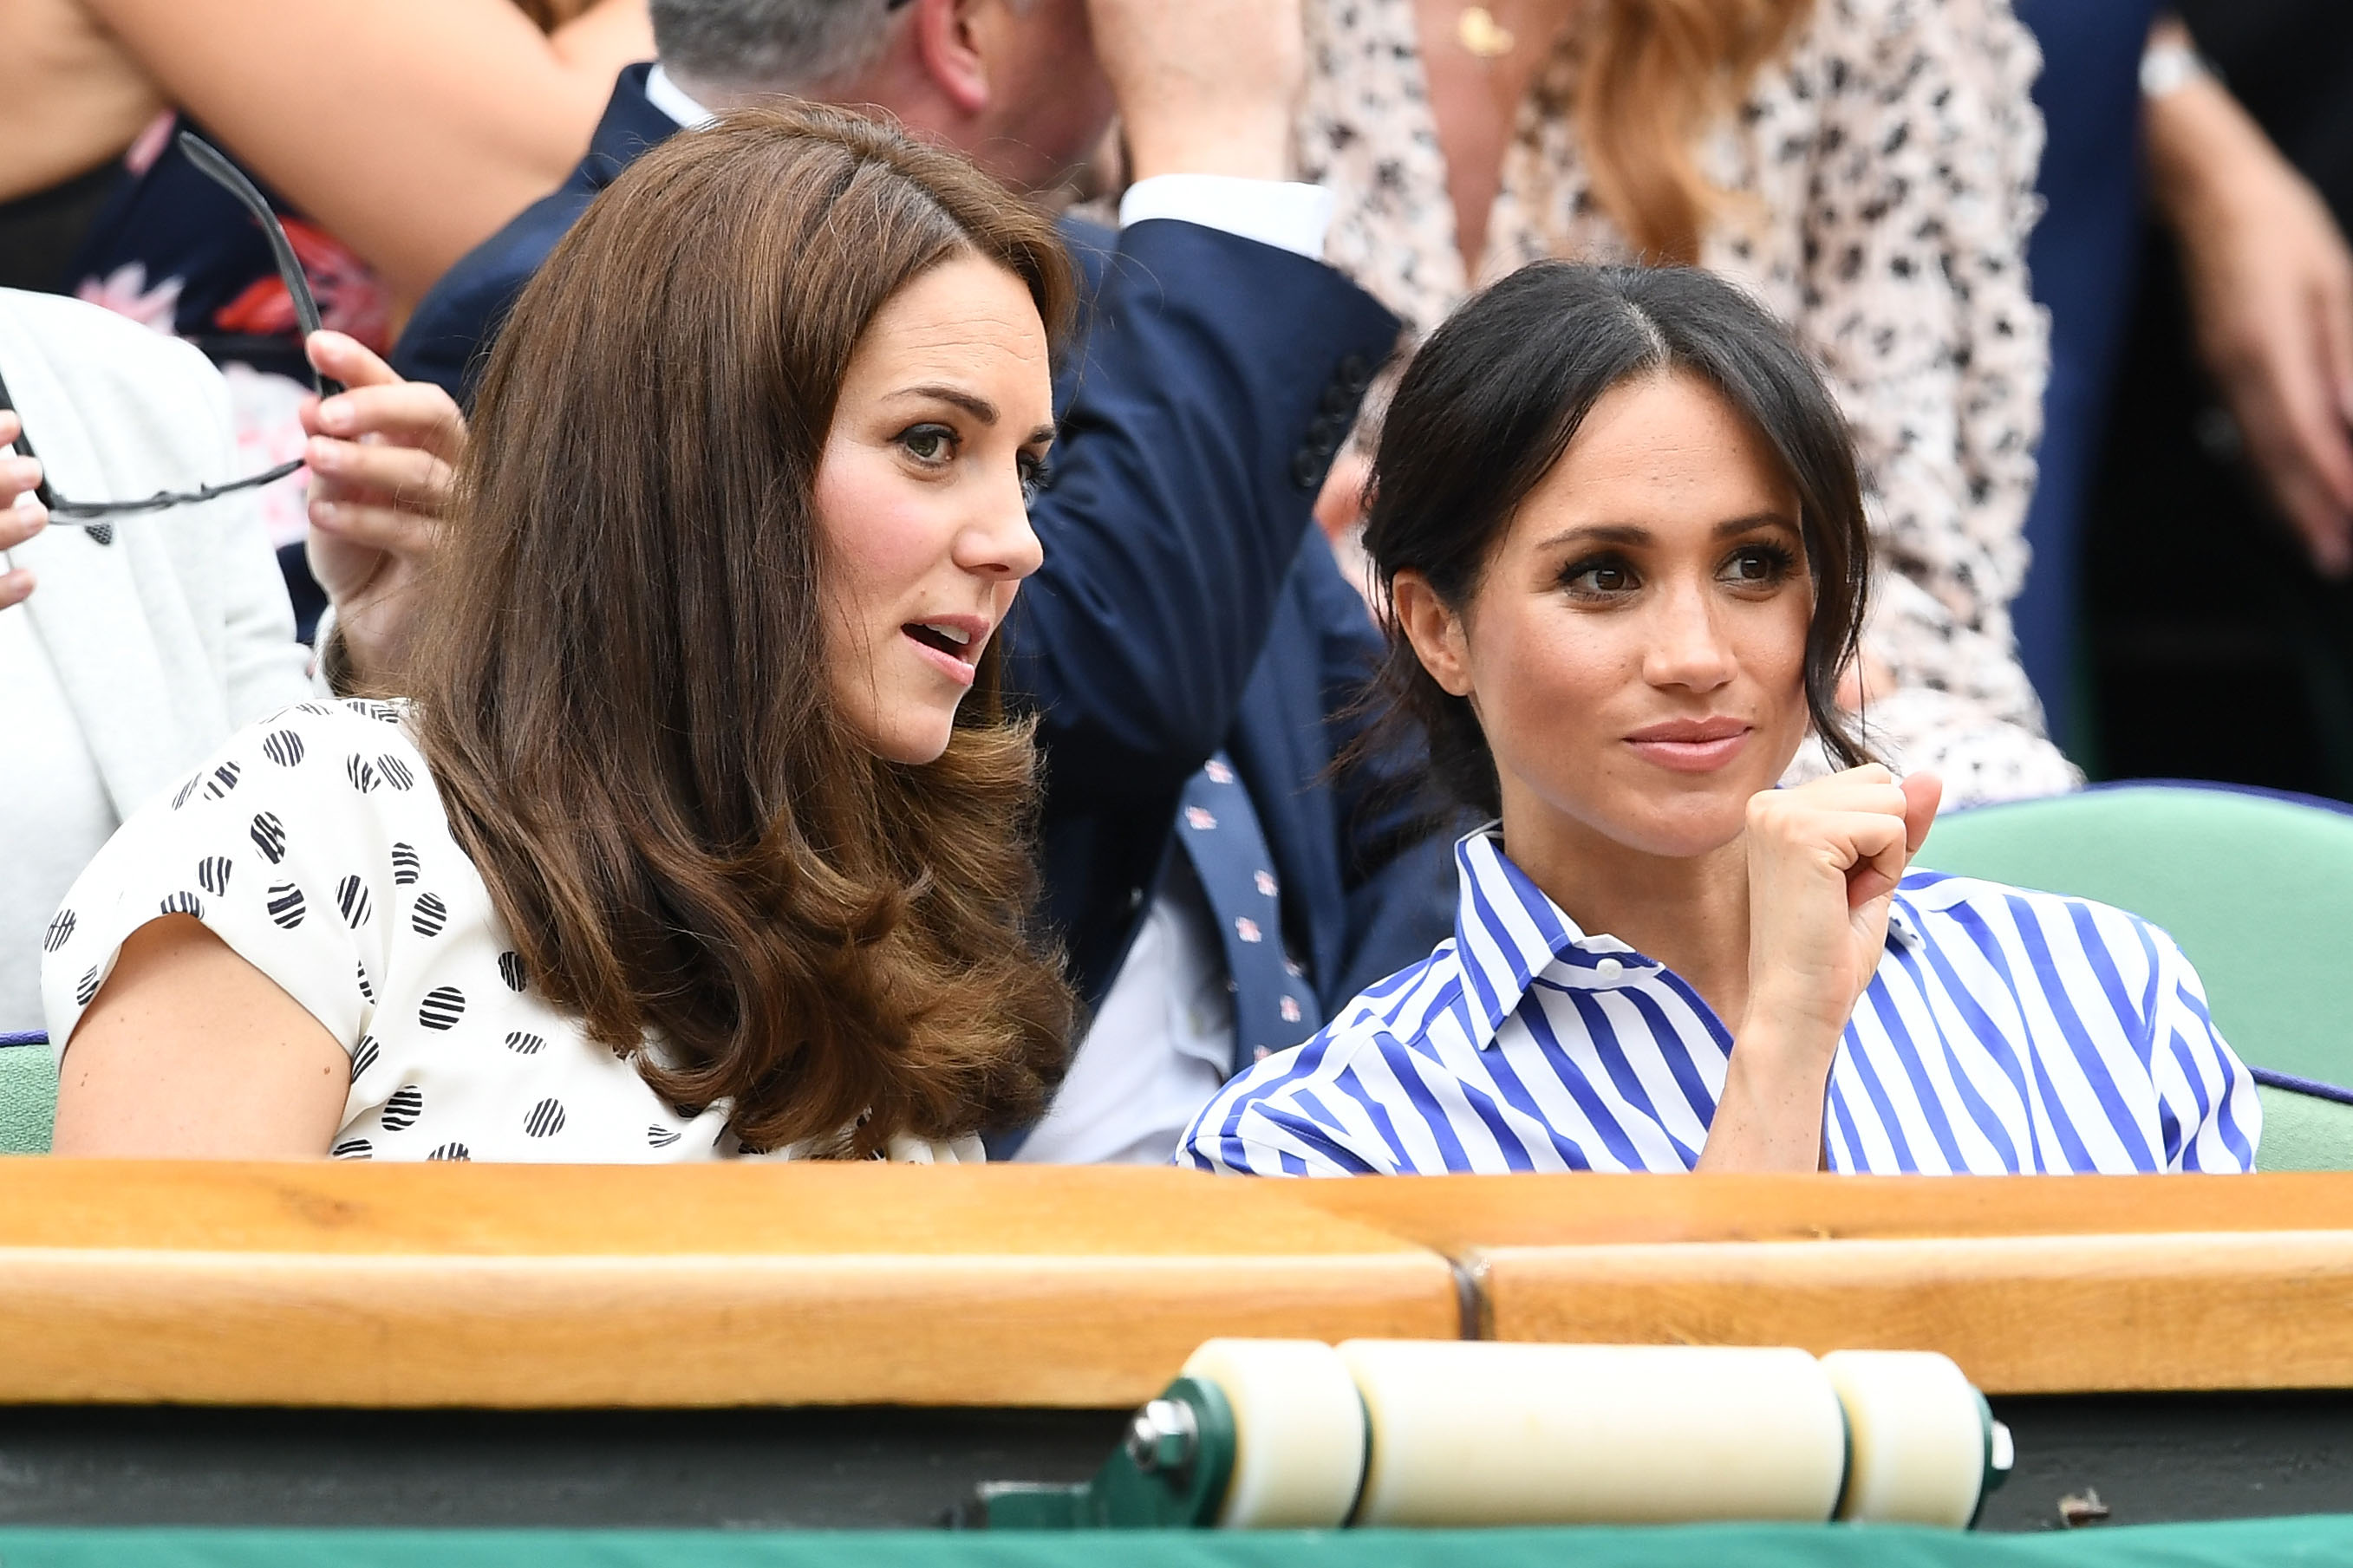 Catherine, Duchess of Cambridge and Meghan, Duchess of Sussex attend day twelve of the Wimbledon Lawn Tennis Championships at All England Lawn Tennis and Croquet Club on July 14 in London, England. (Clive Mason — Getty Images)